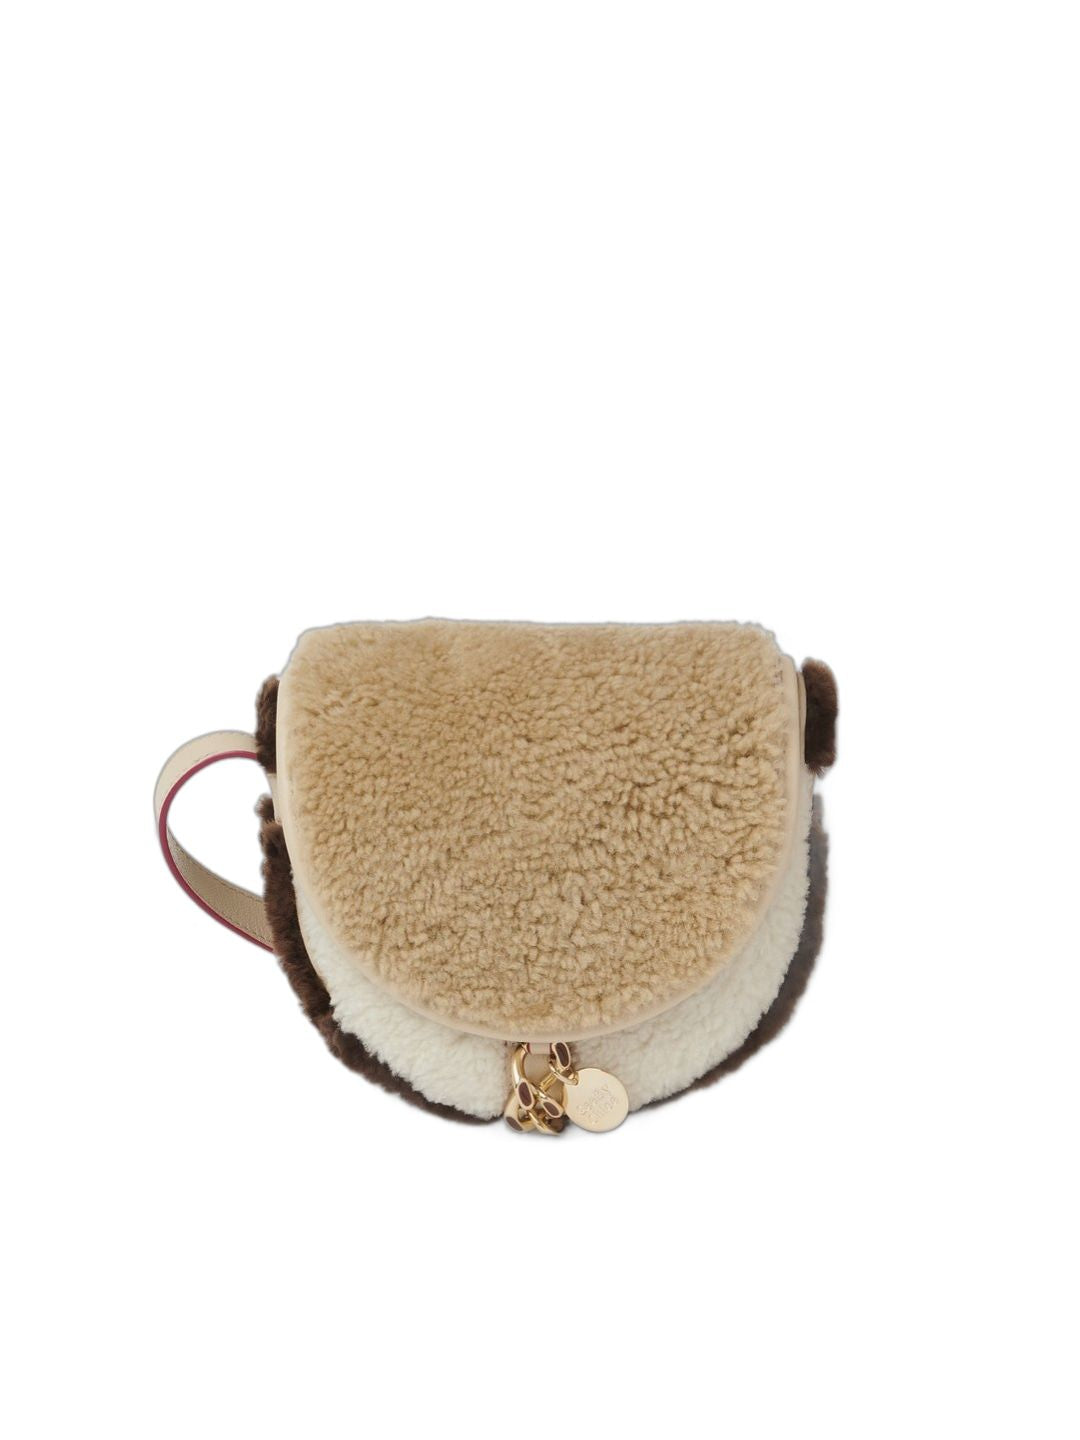 SEE BY CHLOÉ Cement Beige Leather Shoulder & Crossbody Bag for Women - FW23 Collection